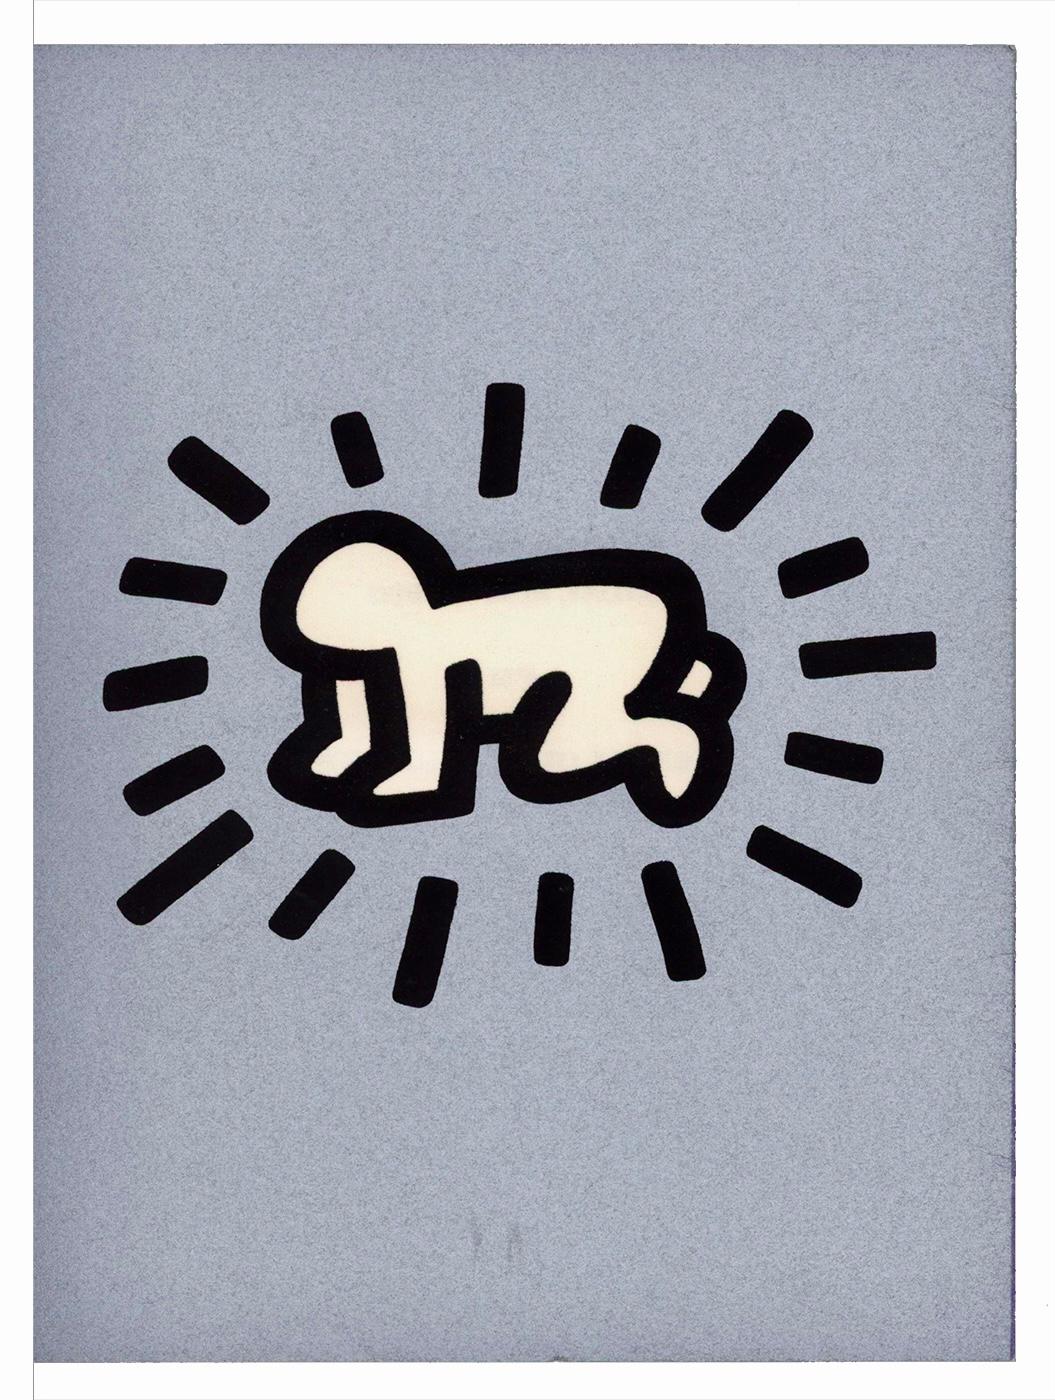 (after) Keith Haring Figurative Print – Gedenkskulptur von Keith Haring, 1990 (Keith Haring Baby) 